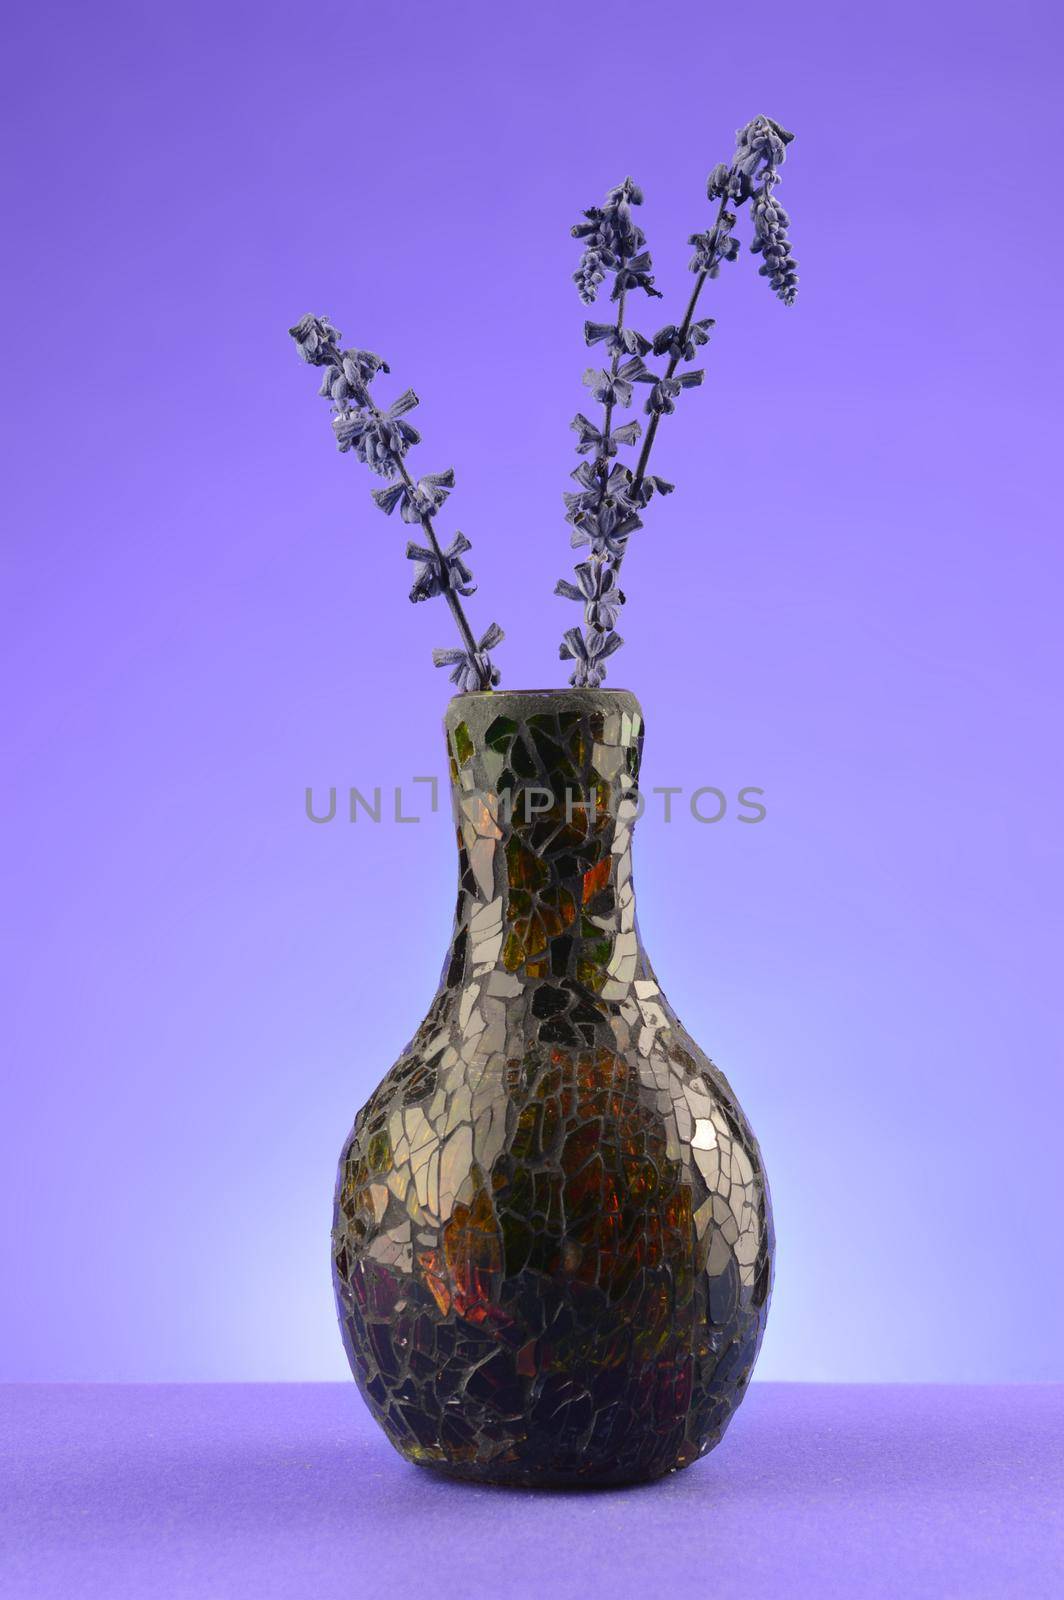 A decorative vase with some freshly dried lavender over a monochromatic violet colored background.